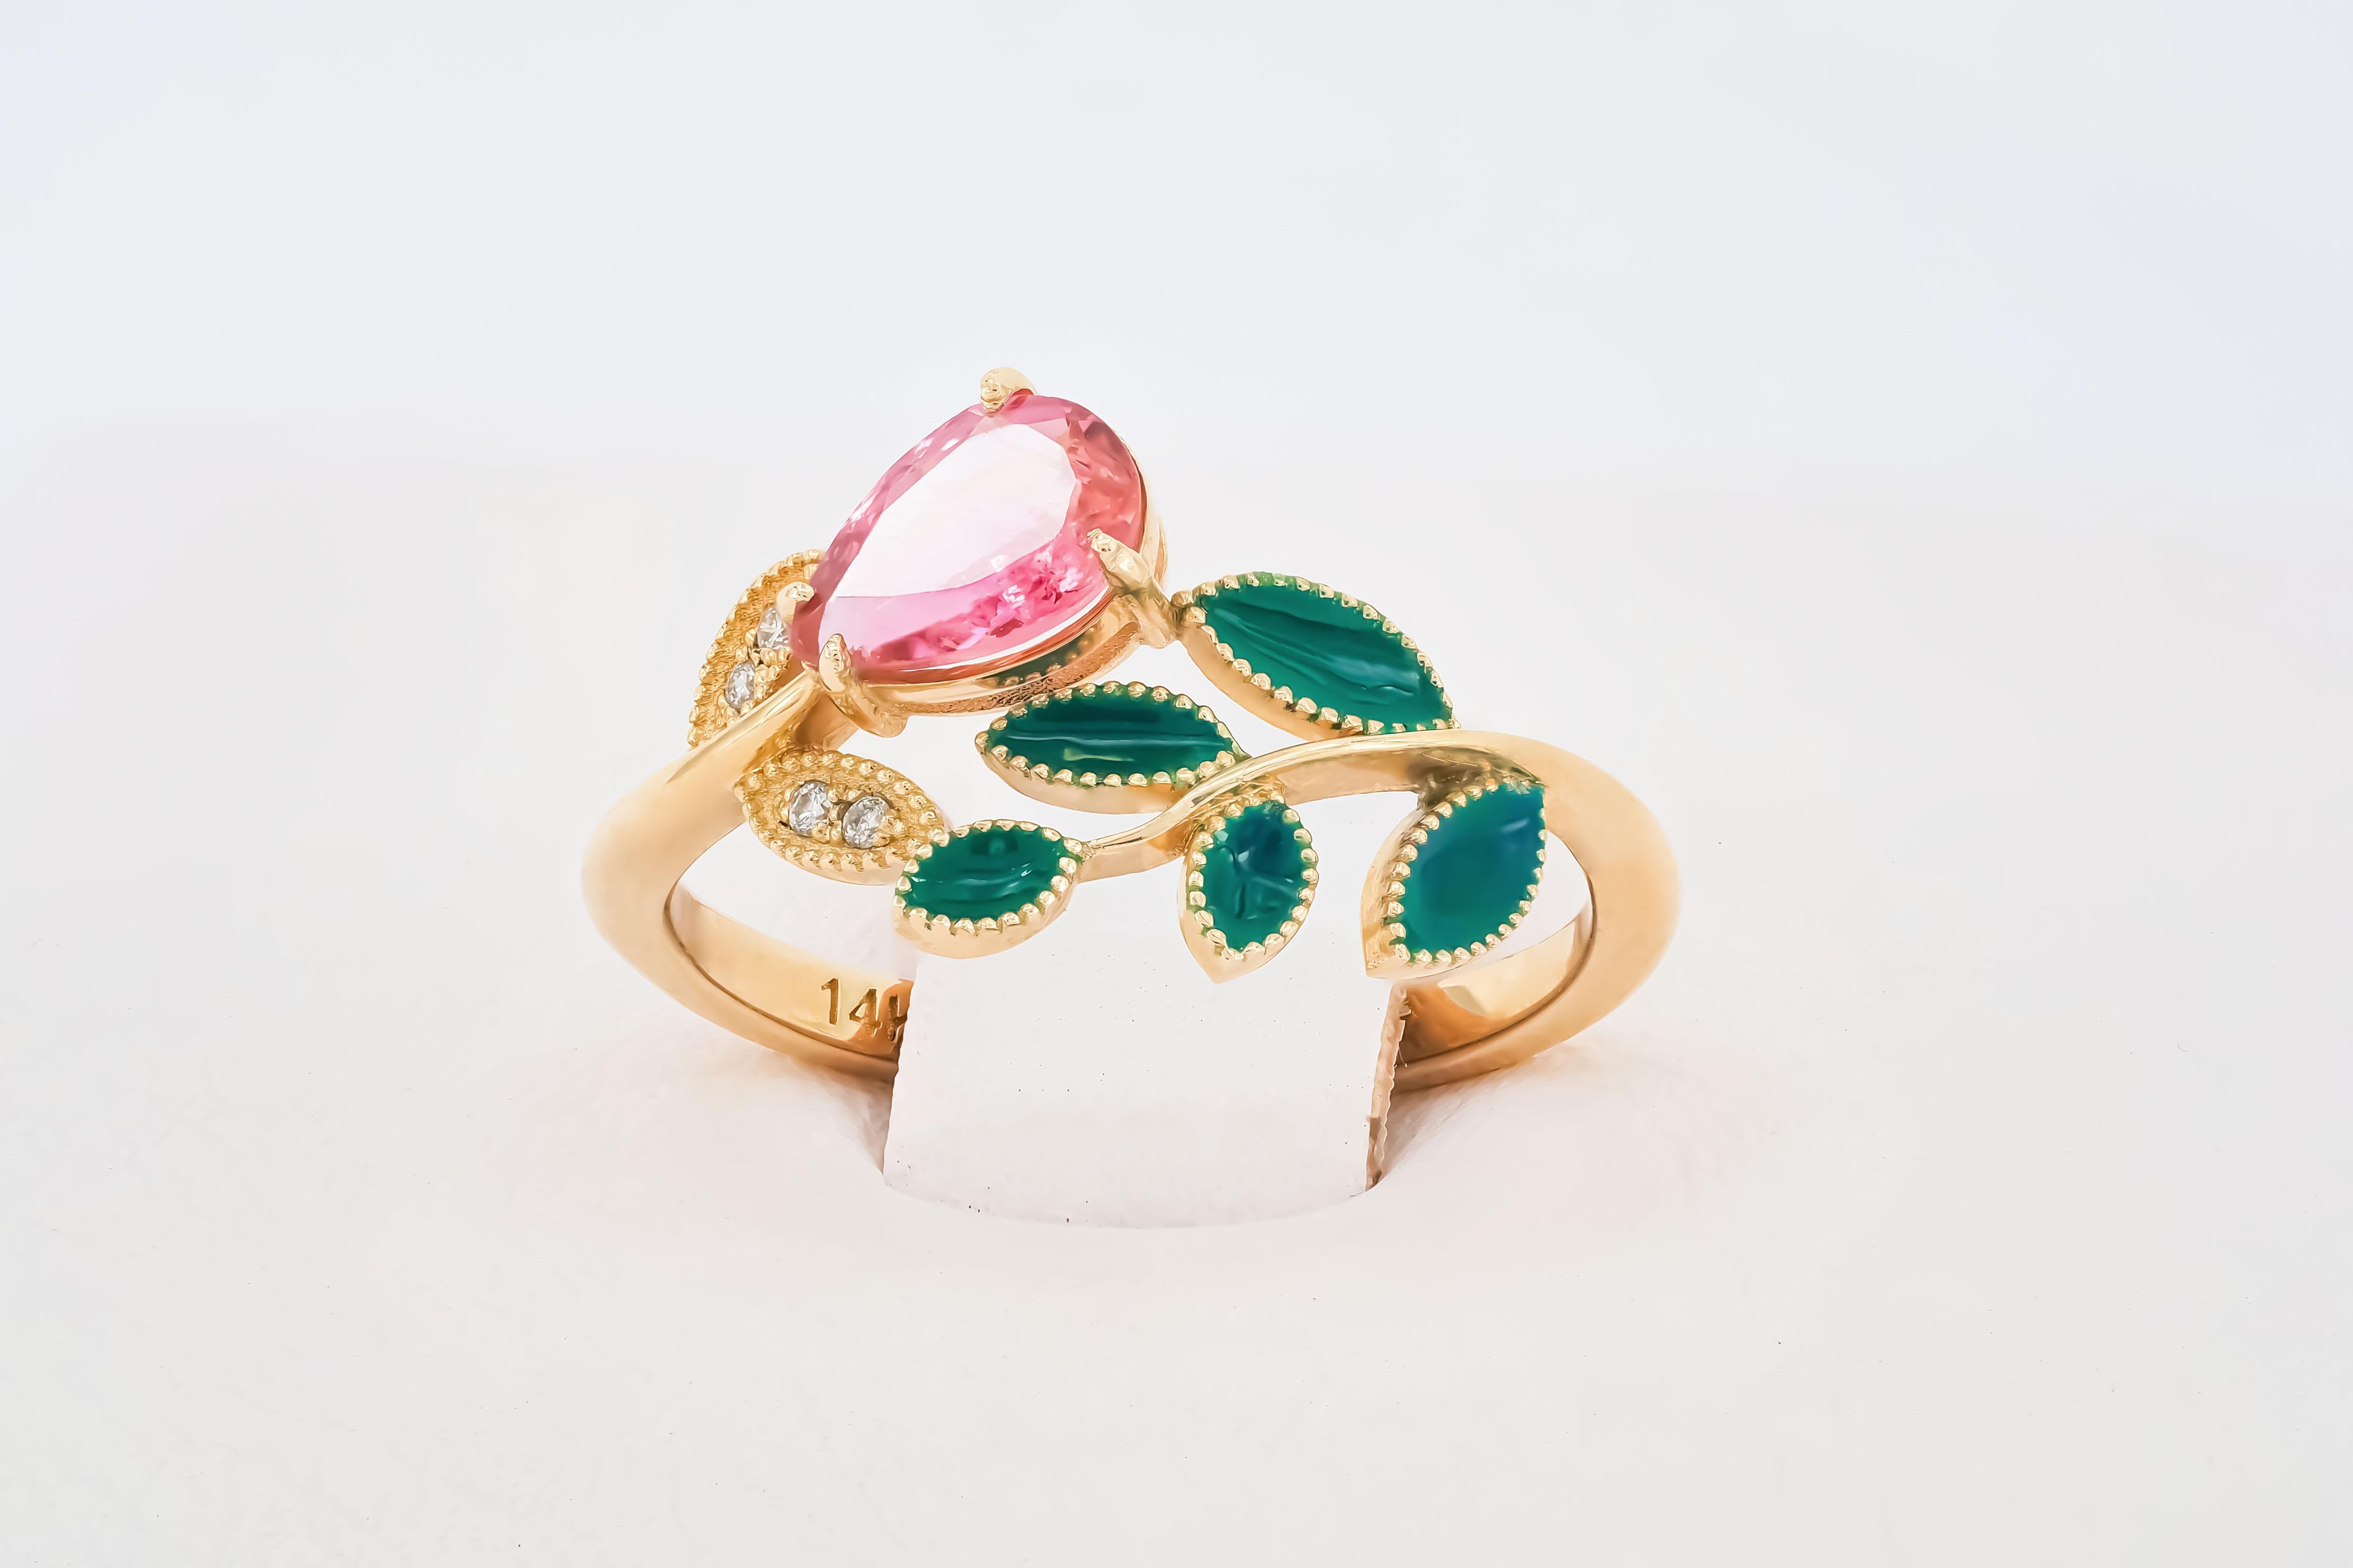 For Sale:  Pink Tourmaline Ring in 14k Gold, Tourmaline Gold Ring 6